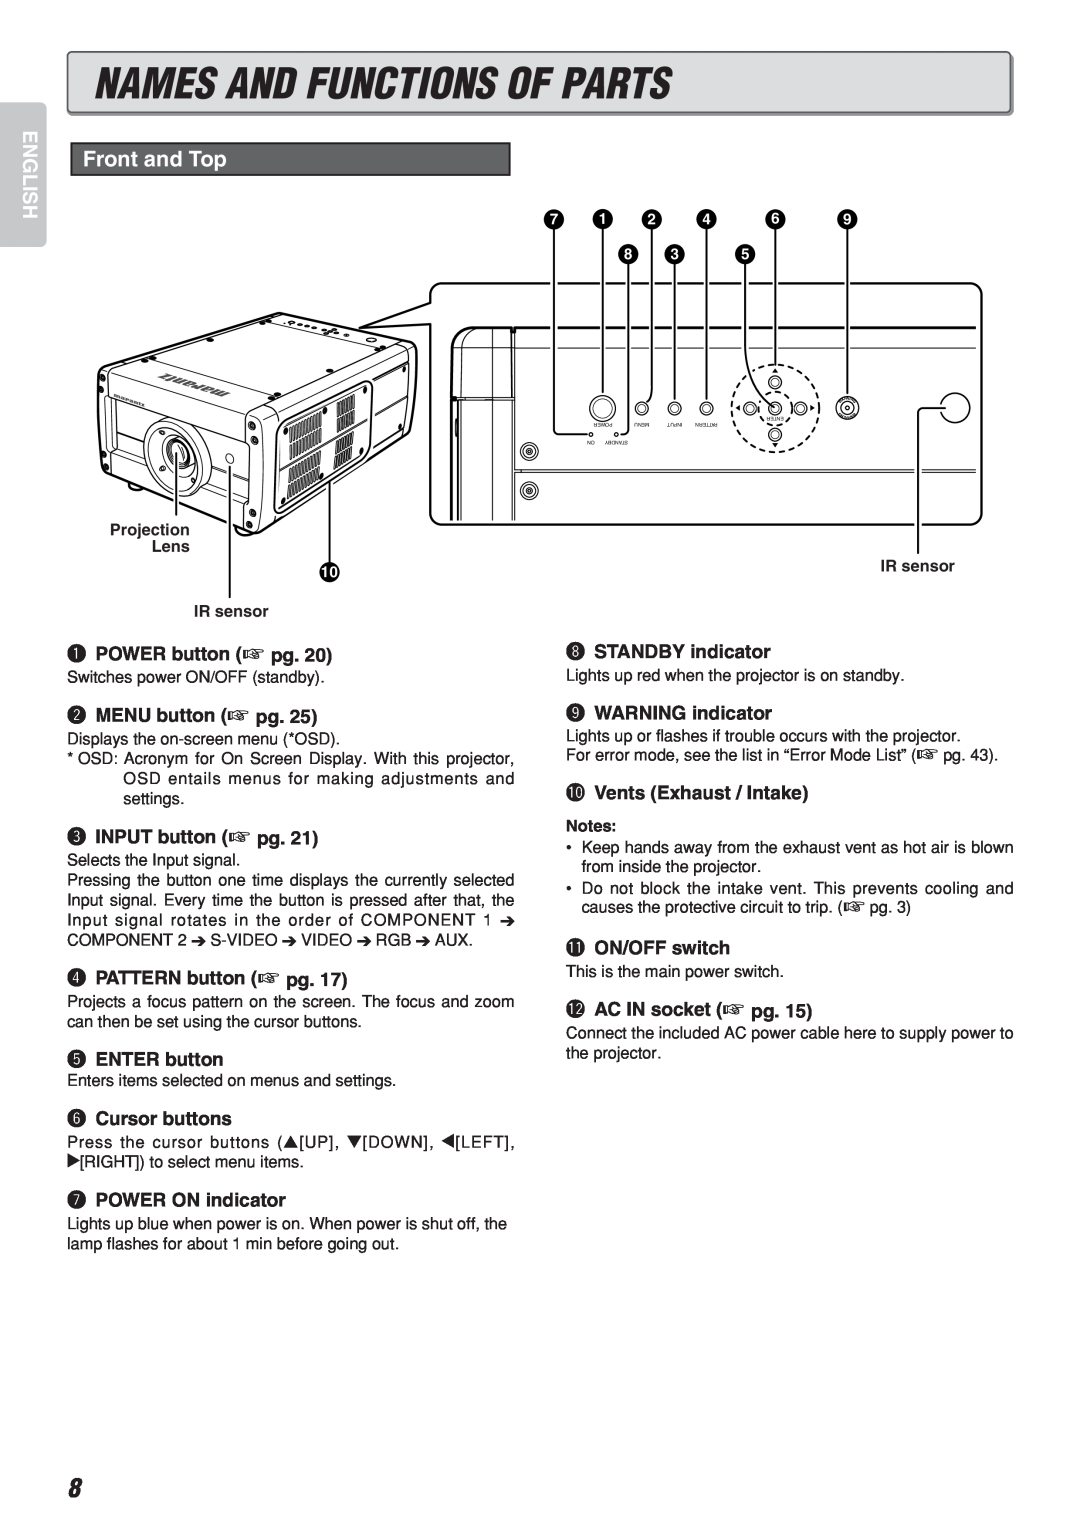 Marantz Model VP-10S1 manual Names And Functions Of Parts, Front and Top, English 